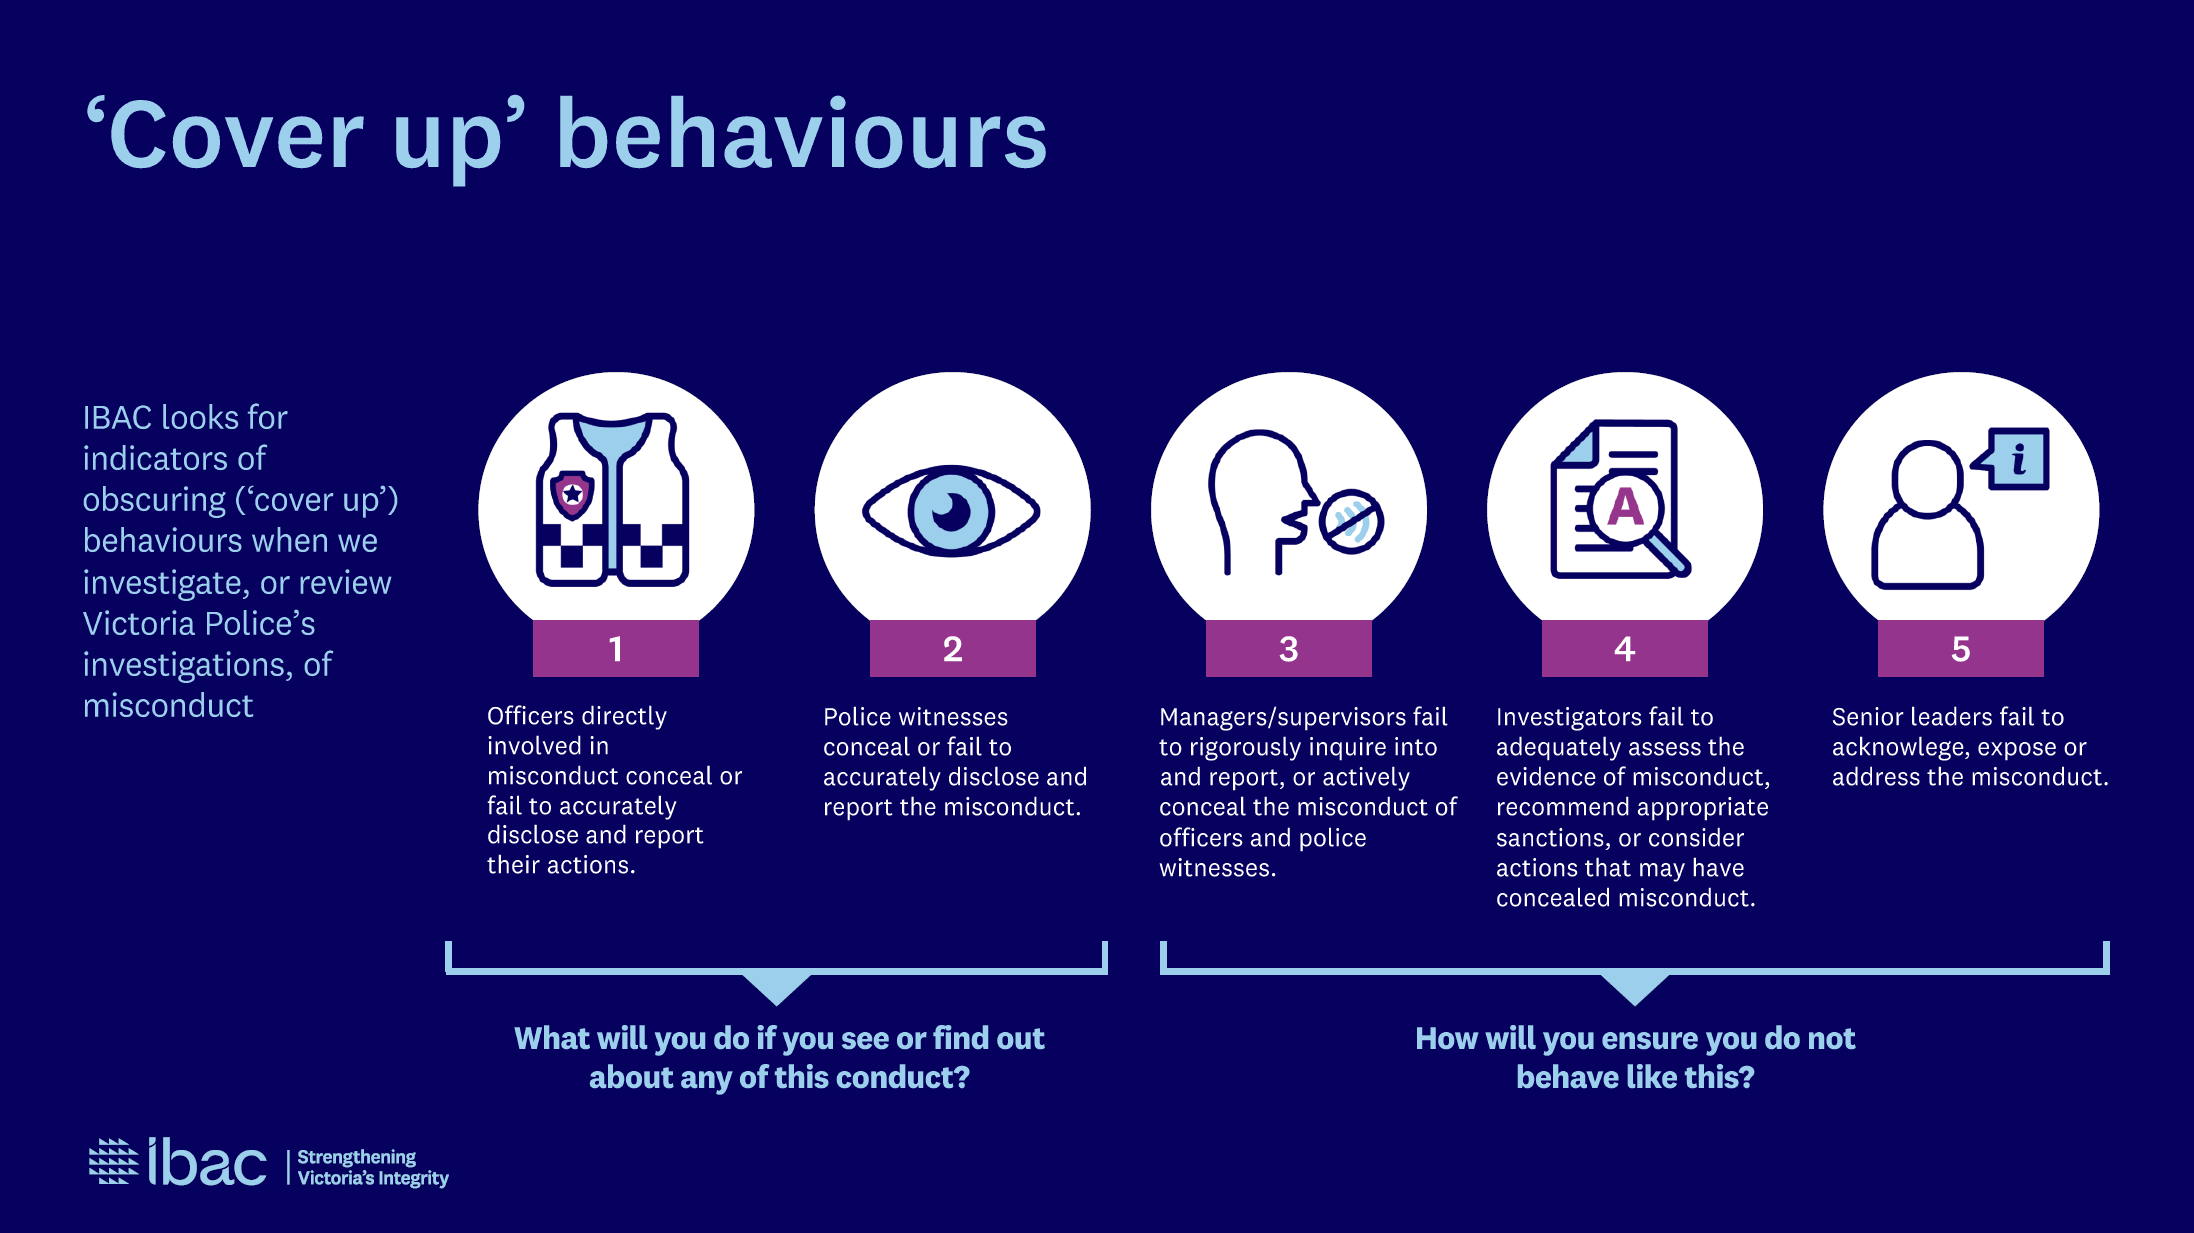 Common 'cover up' behaviours